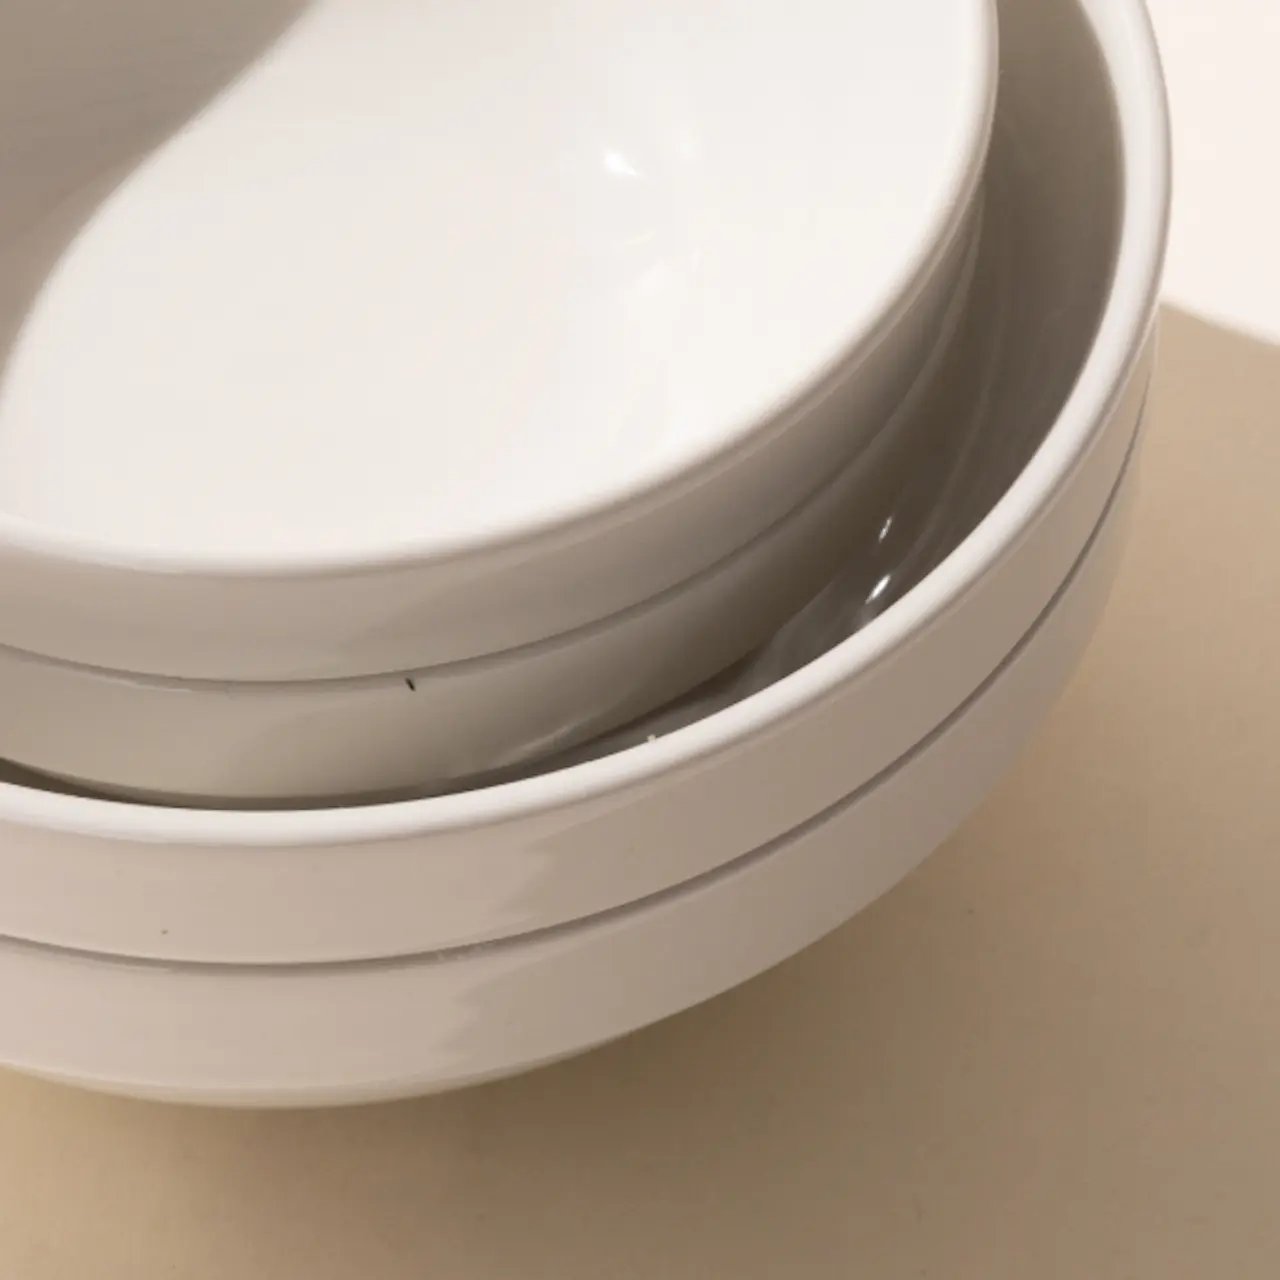 A stack of three white ceramic plates of different sizes placed on a beige surface.